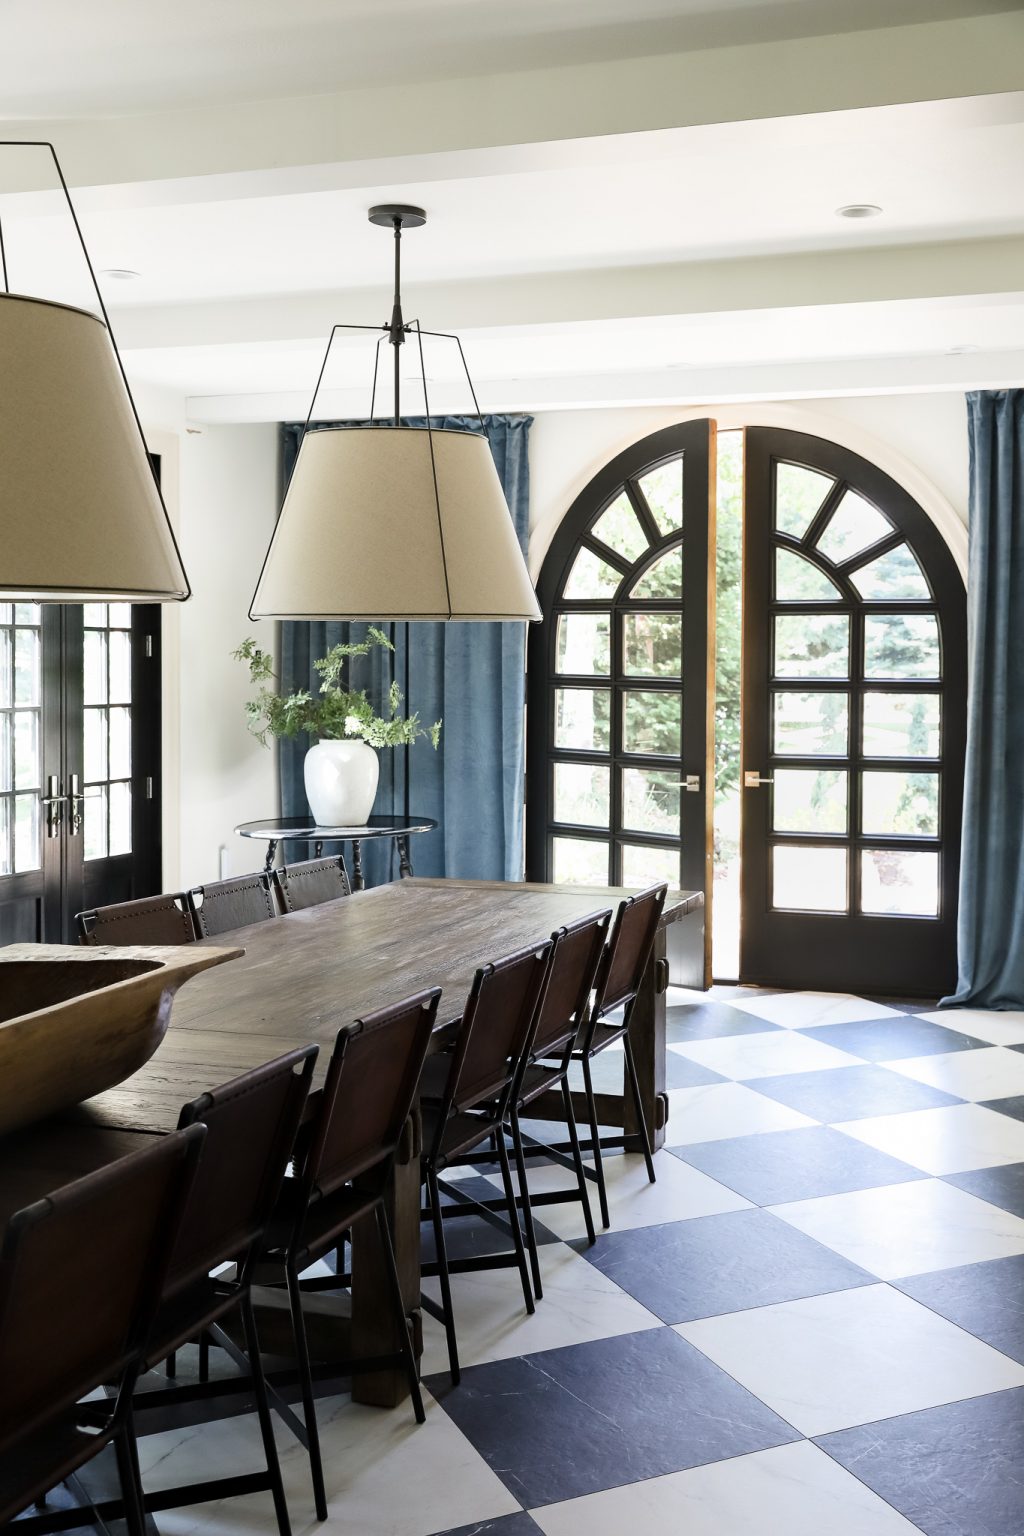 Beautiful spaces of the week: an amazing dining room with black and white tiled floor and arched wood doorway from Chris Loves Julia #diningroom #diningroomdecor #diningroomideas